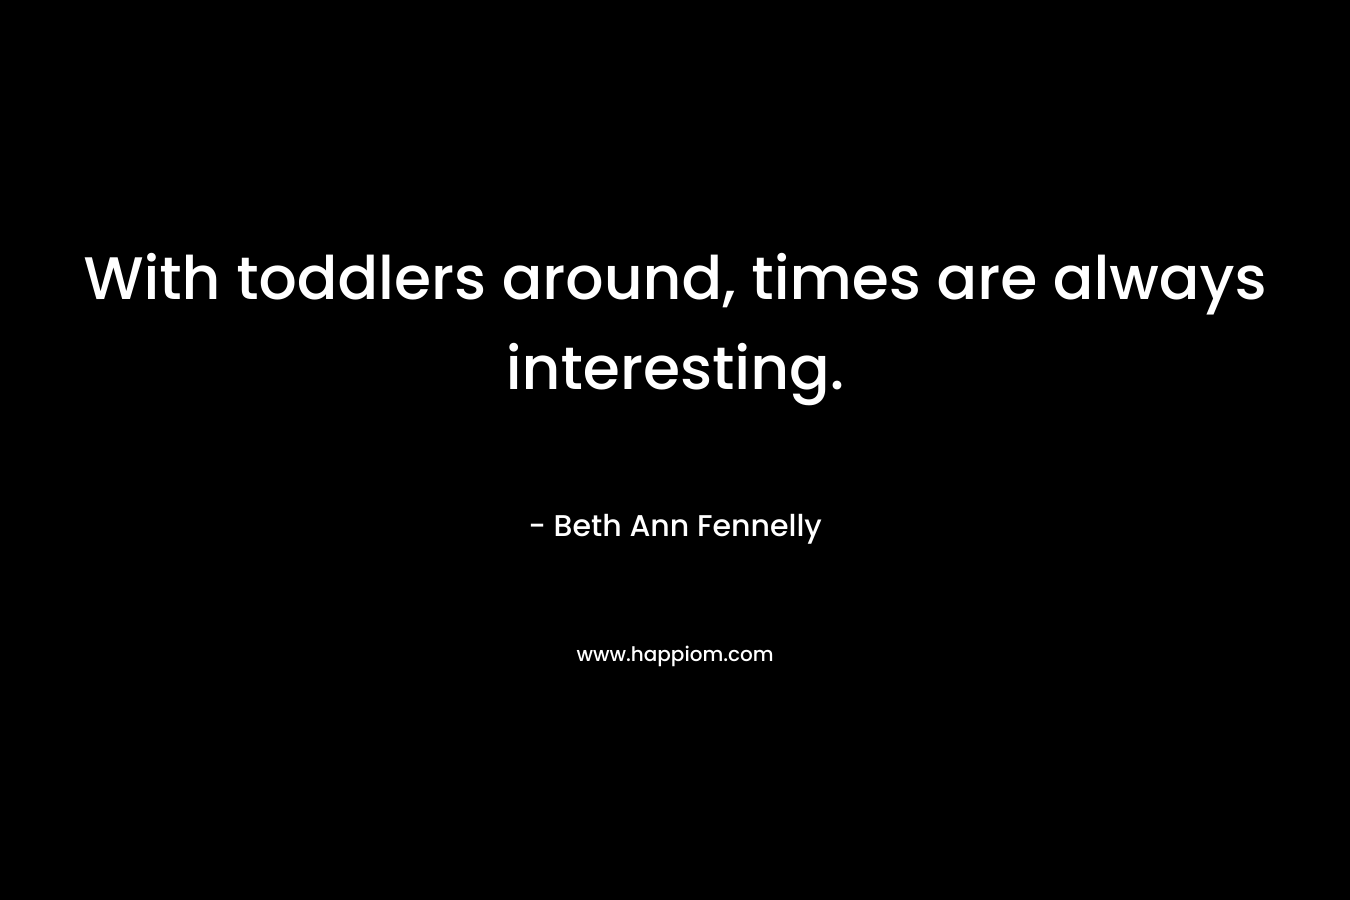 With toddlers around, times are always interesting.